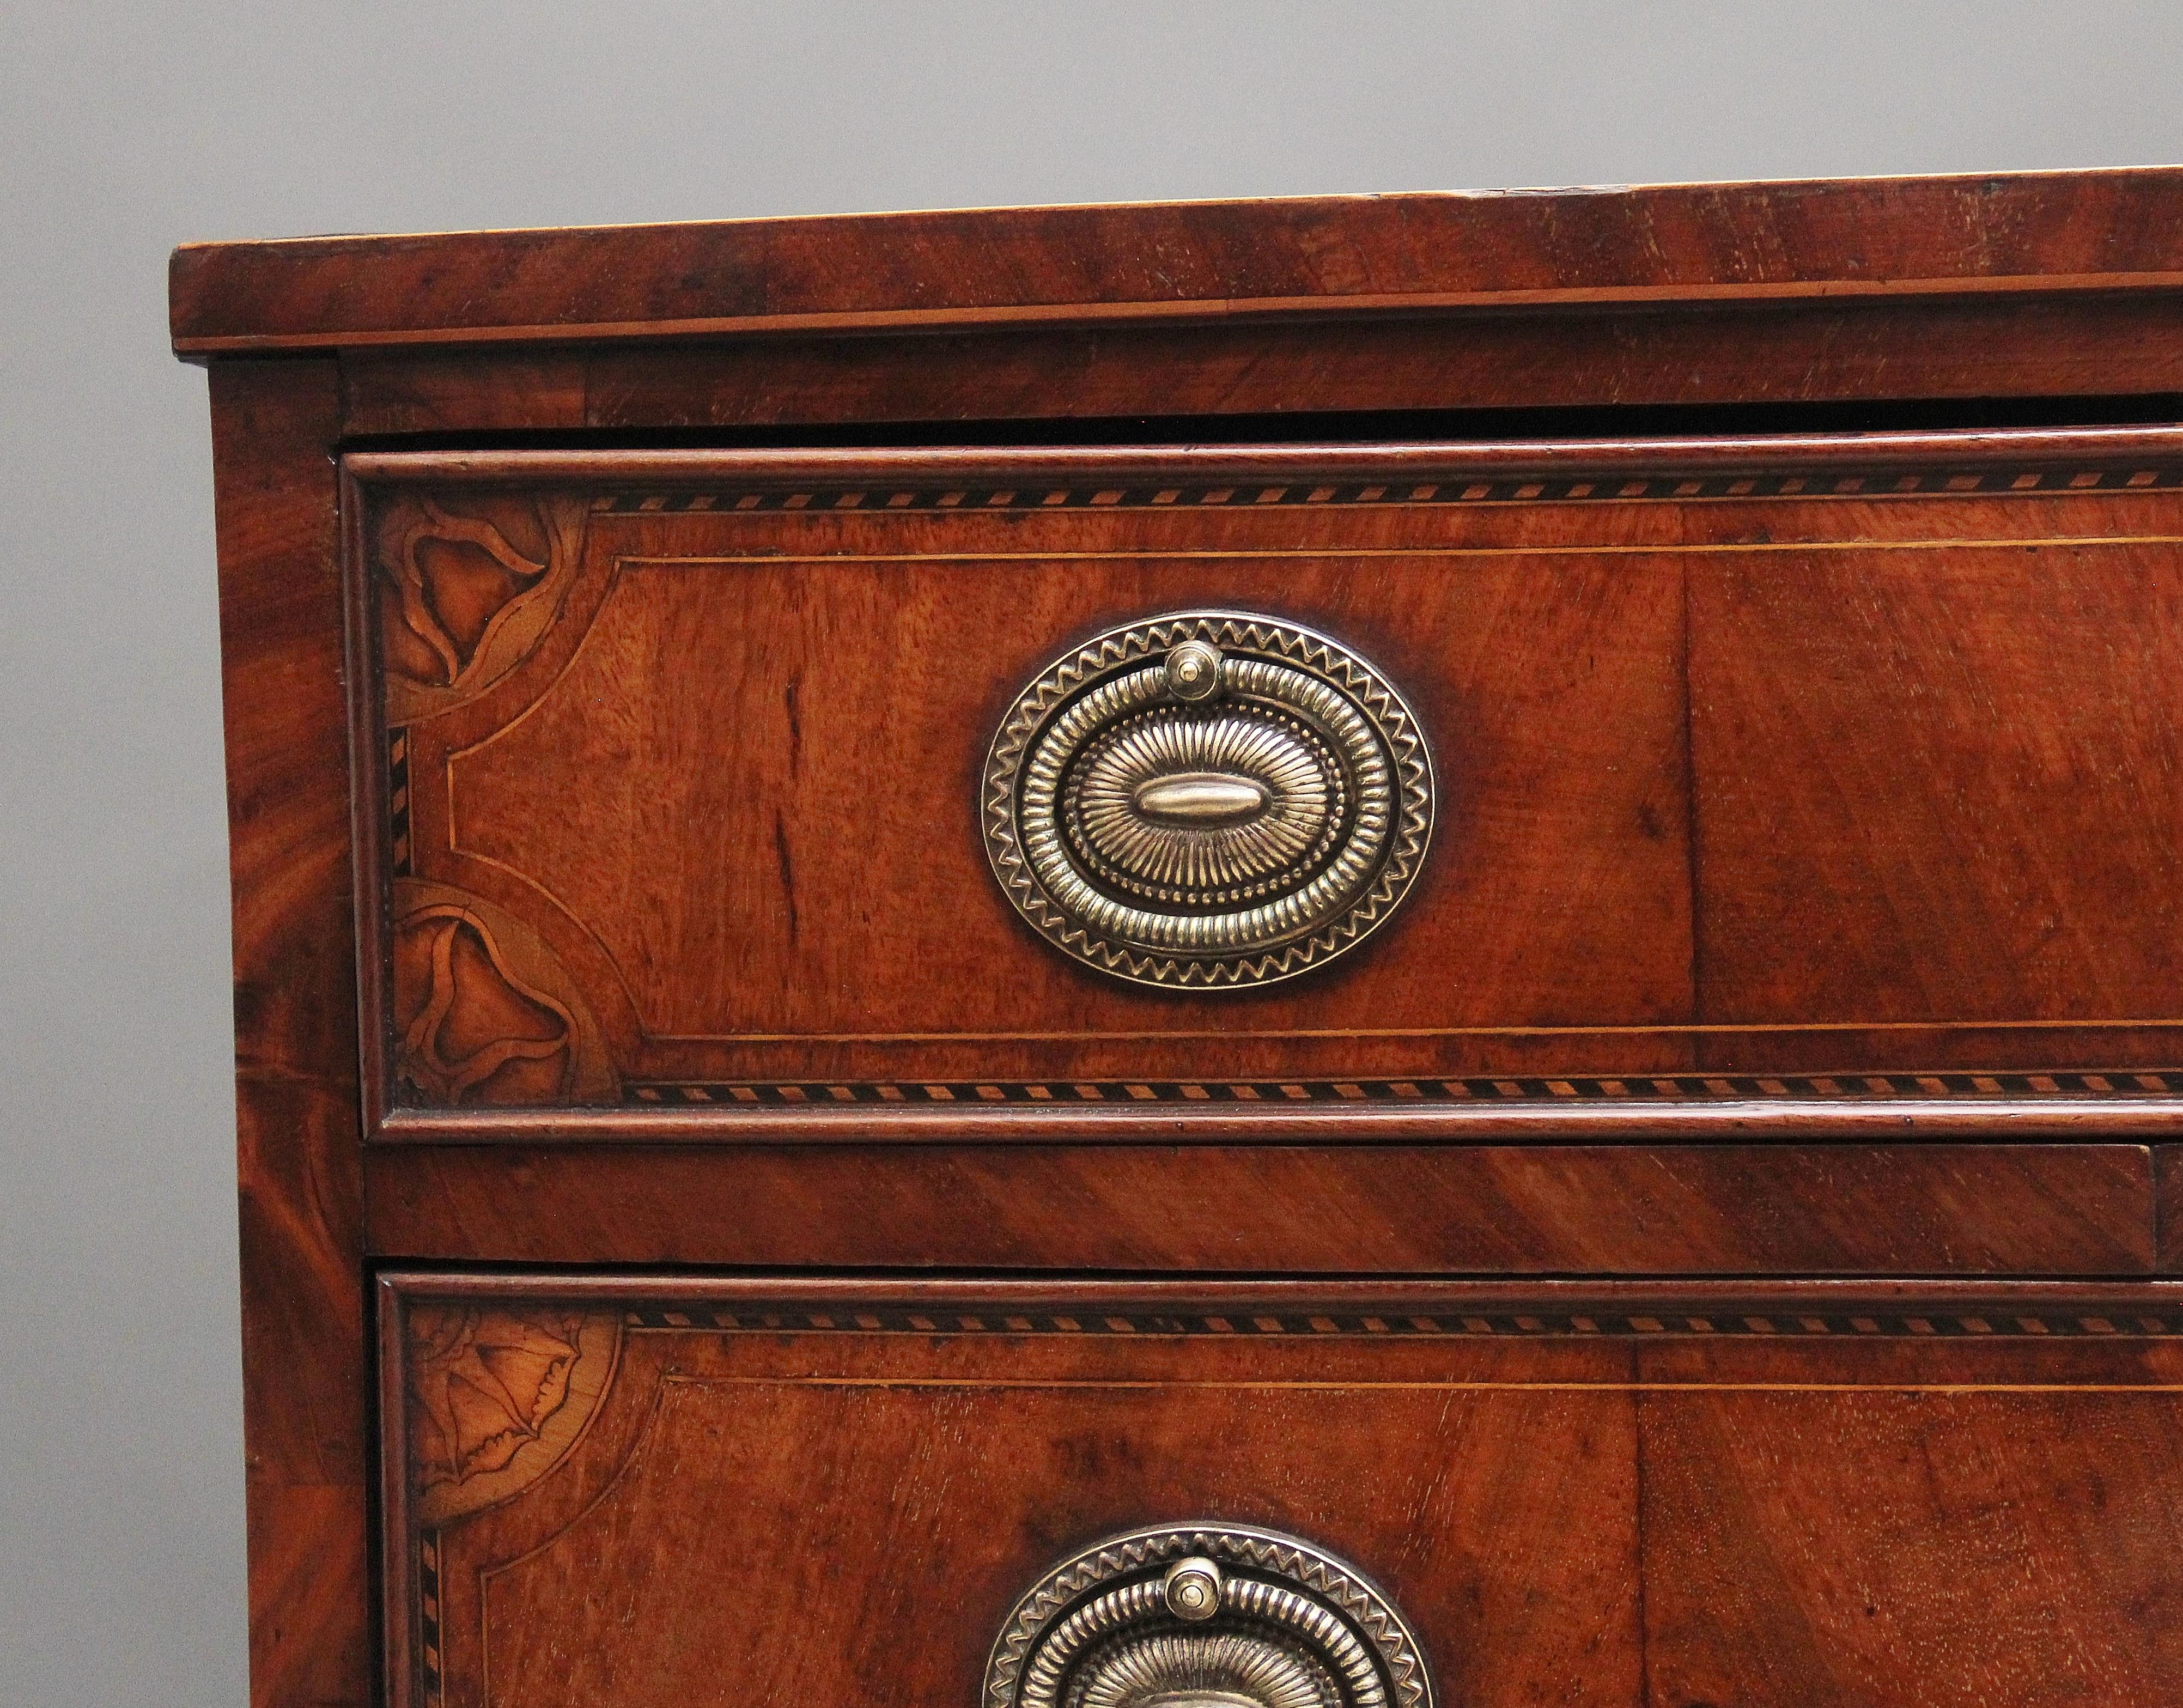 A fabulous quality 18th Century inlaid mahogany bowfront chest of drawers, having a lovely figured top decorated with chequered inlay, four long graduated drawers below with finely engraved oval brass plate and ring handles, wonderfully figured